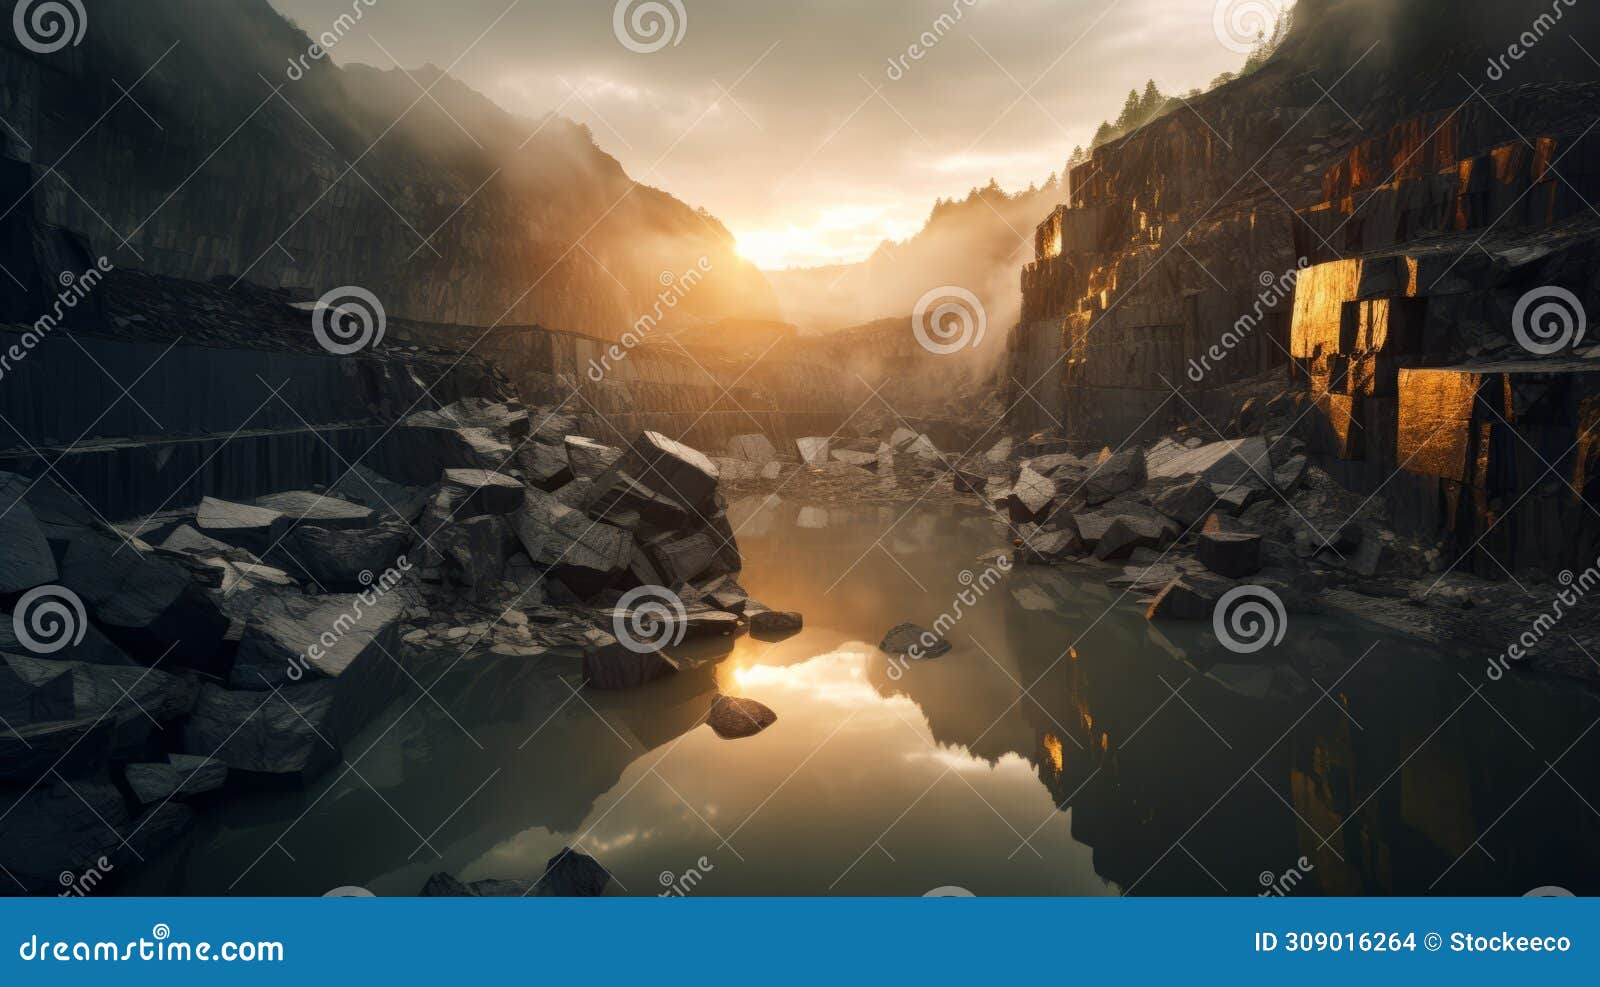 stunning sunrise photography of a majestic quarry with godrays